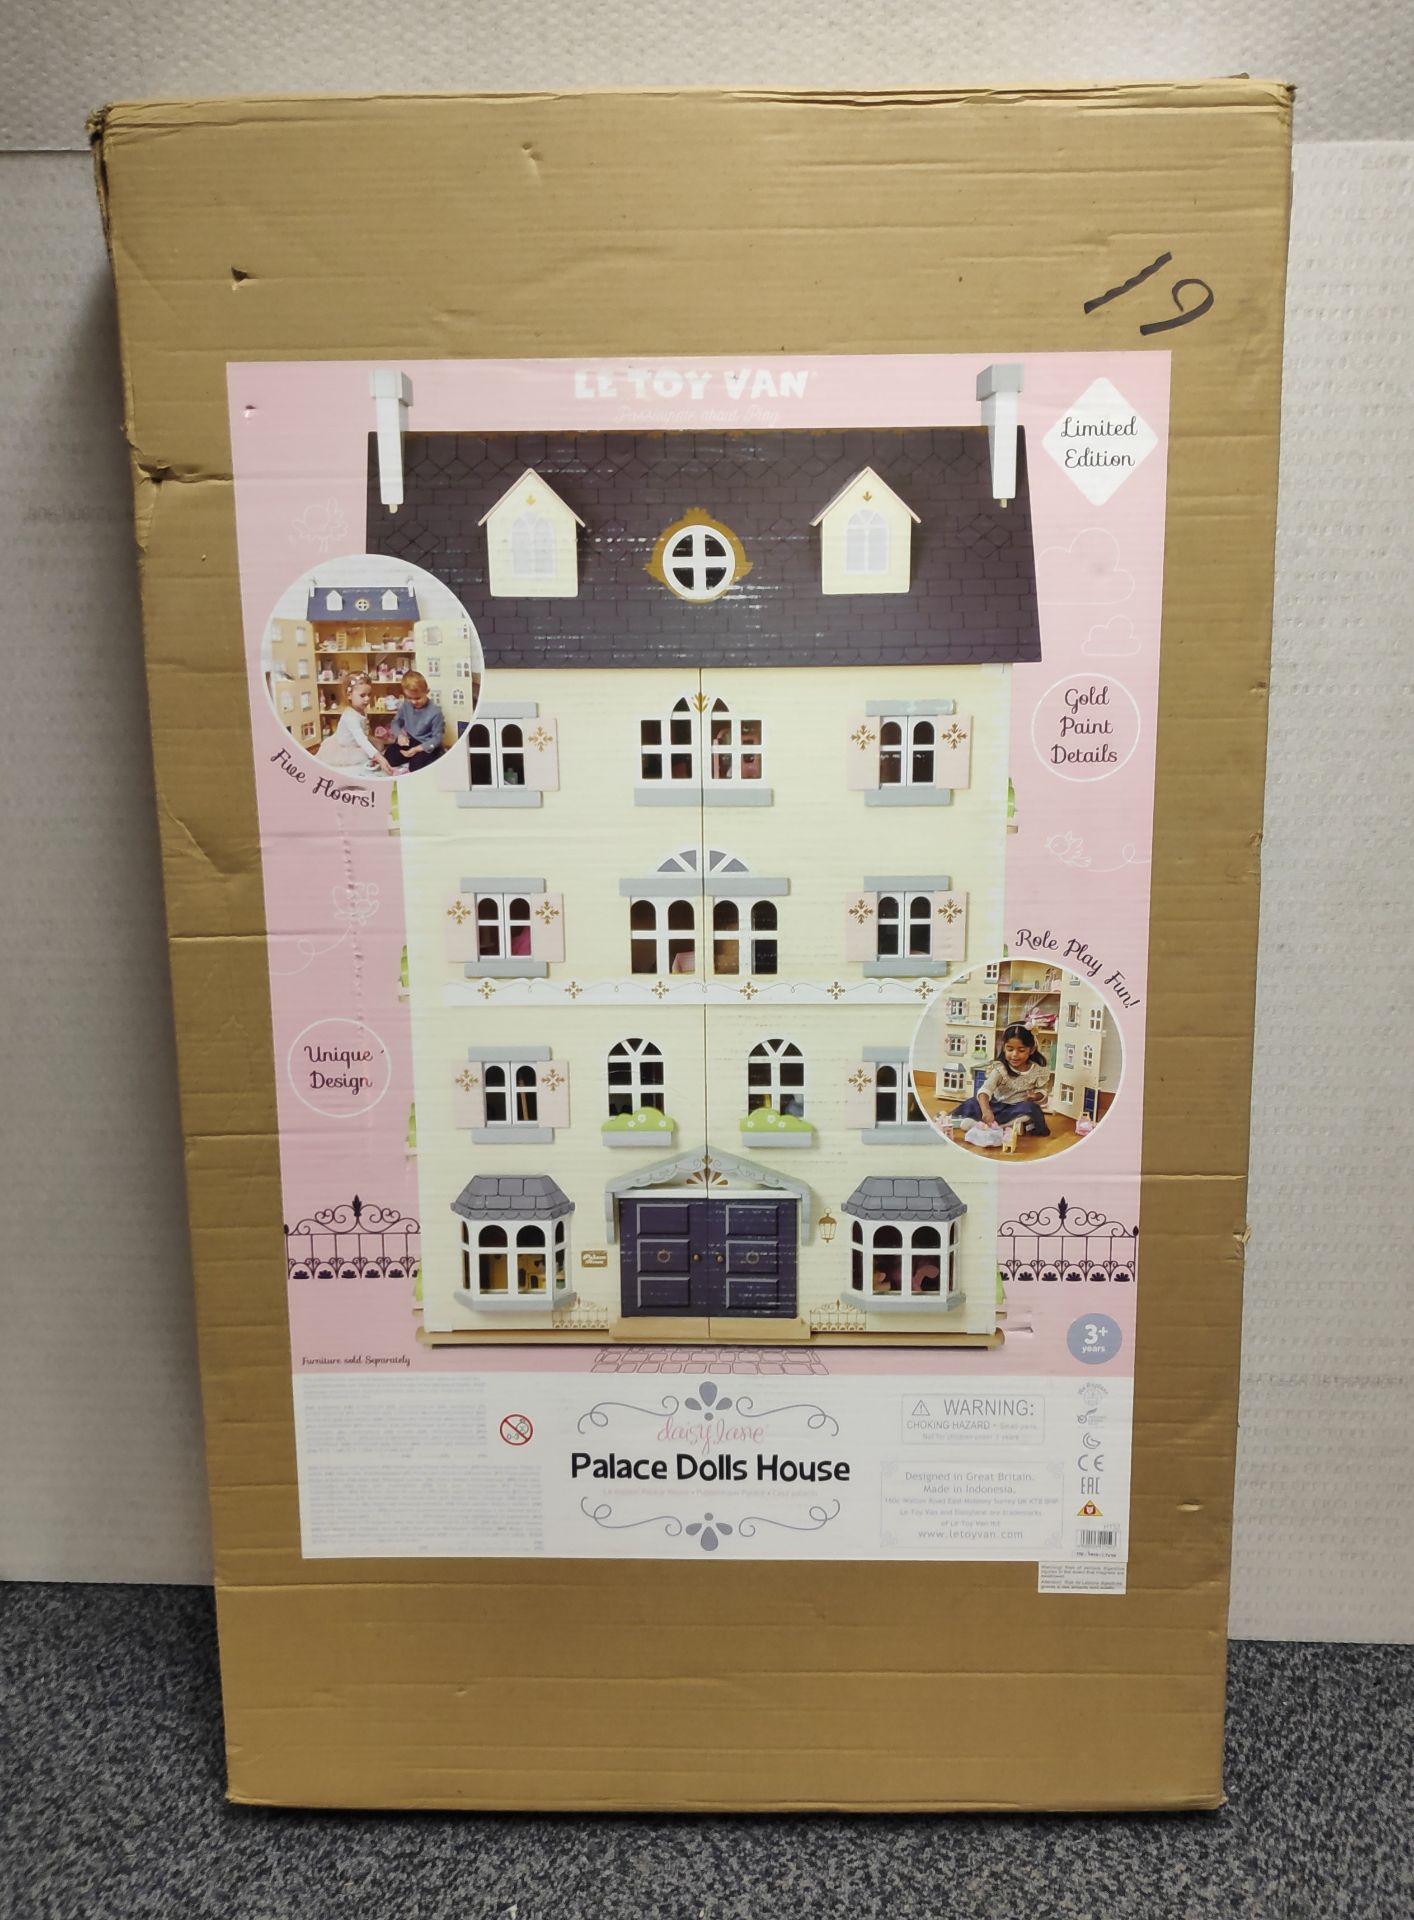 1 x Le Toy Van Wooden Palace Dolls House - New/Boxed - HTYS163 - CL987 - Location: Altrincham WA14 - - Image 8 of 10